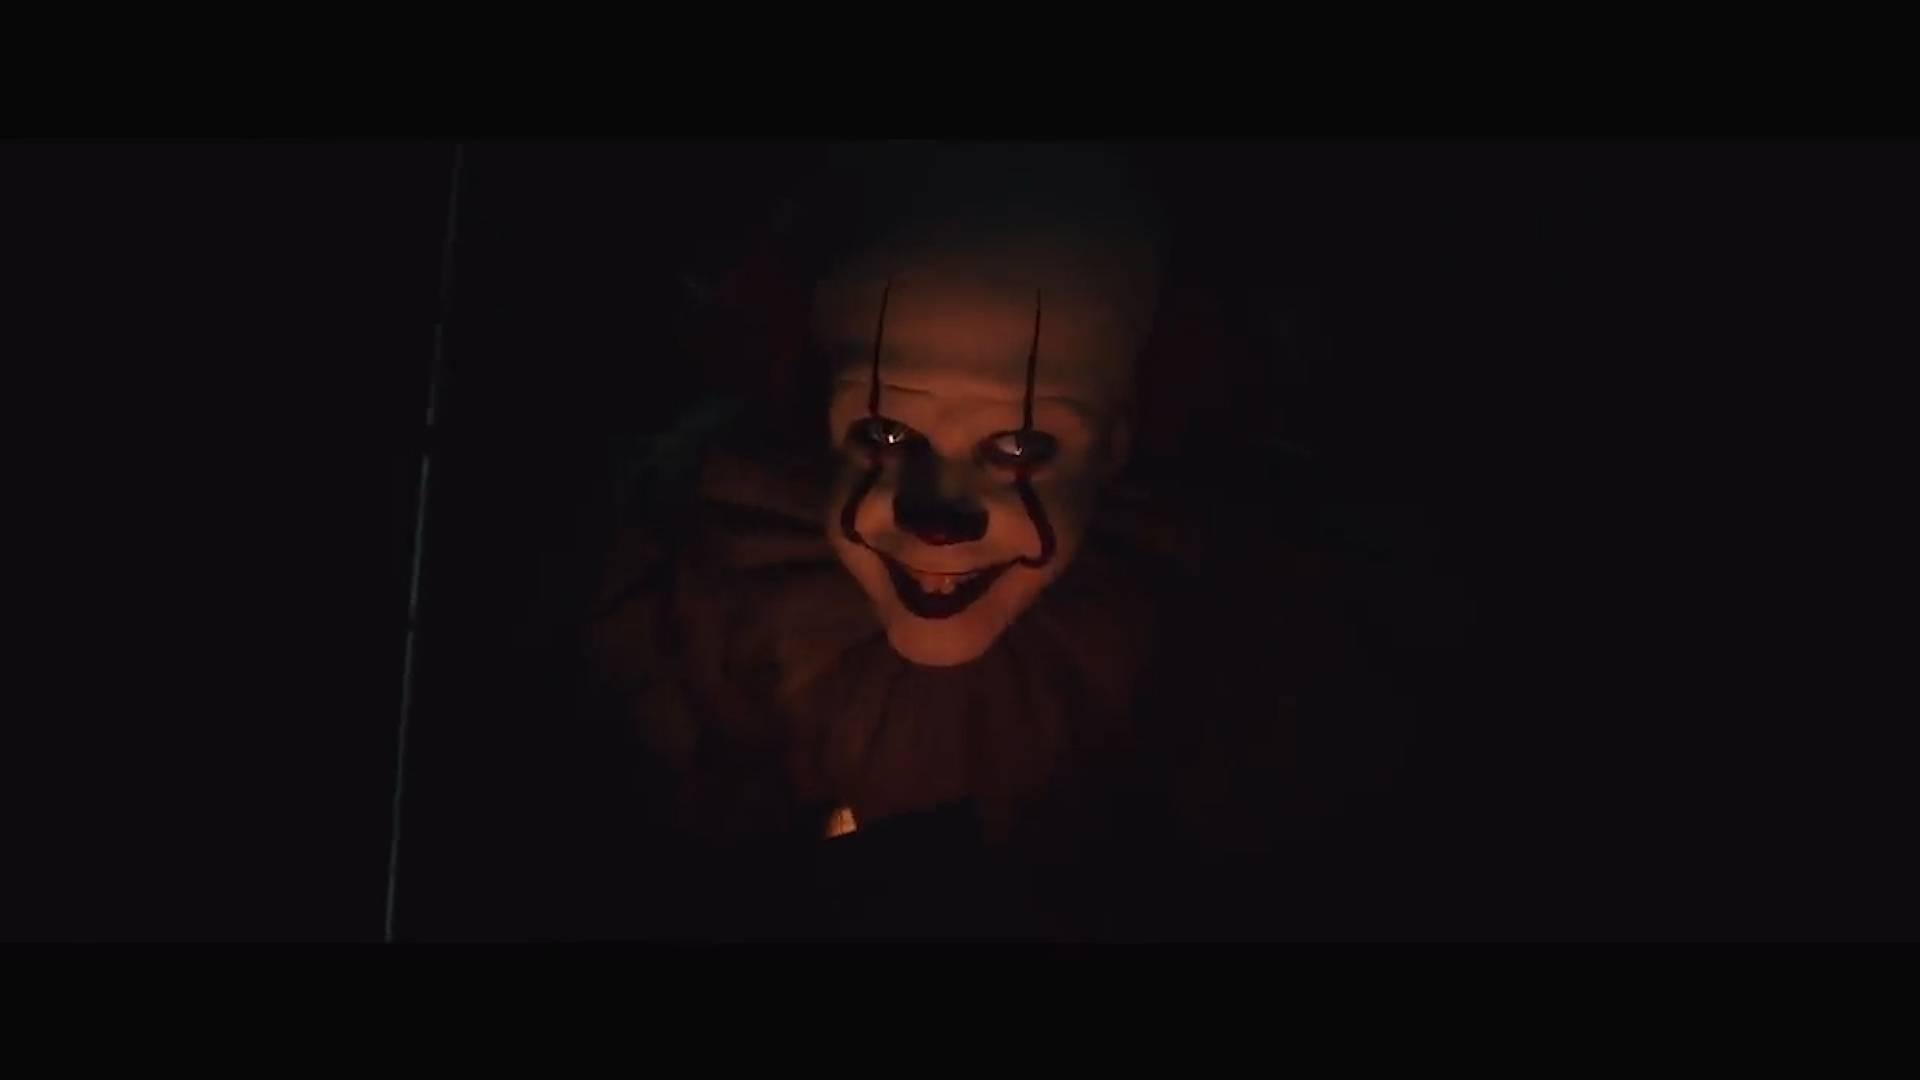 It: Chapter 2' trailer: Pennywise the Clown is back to terrorize